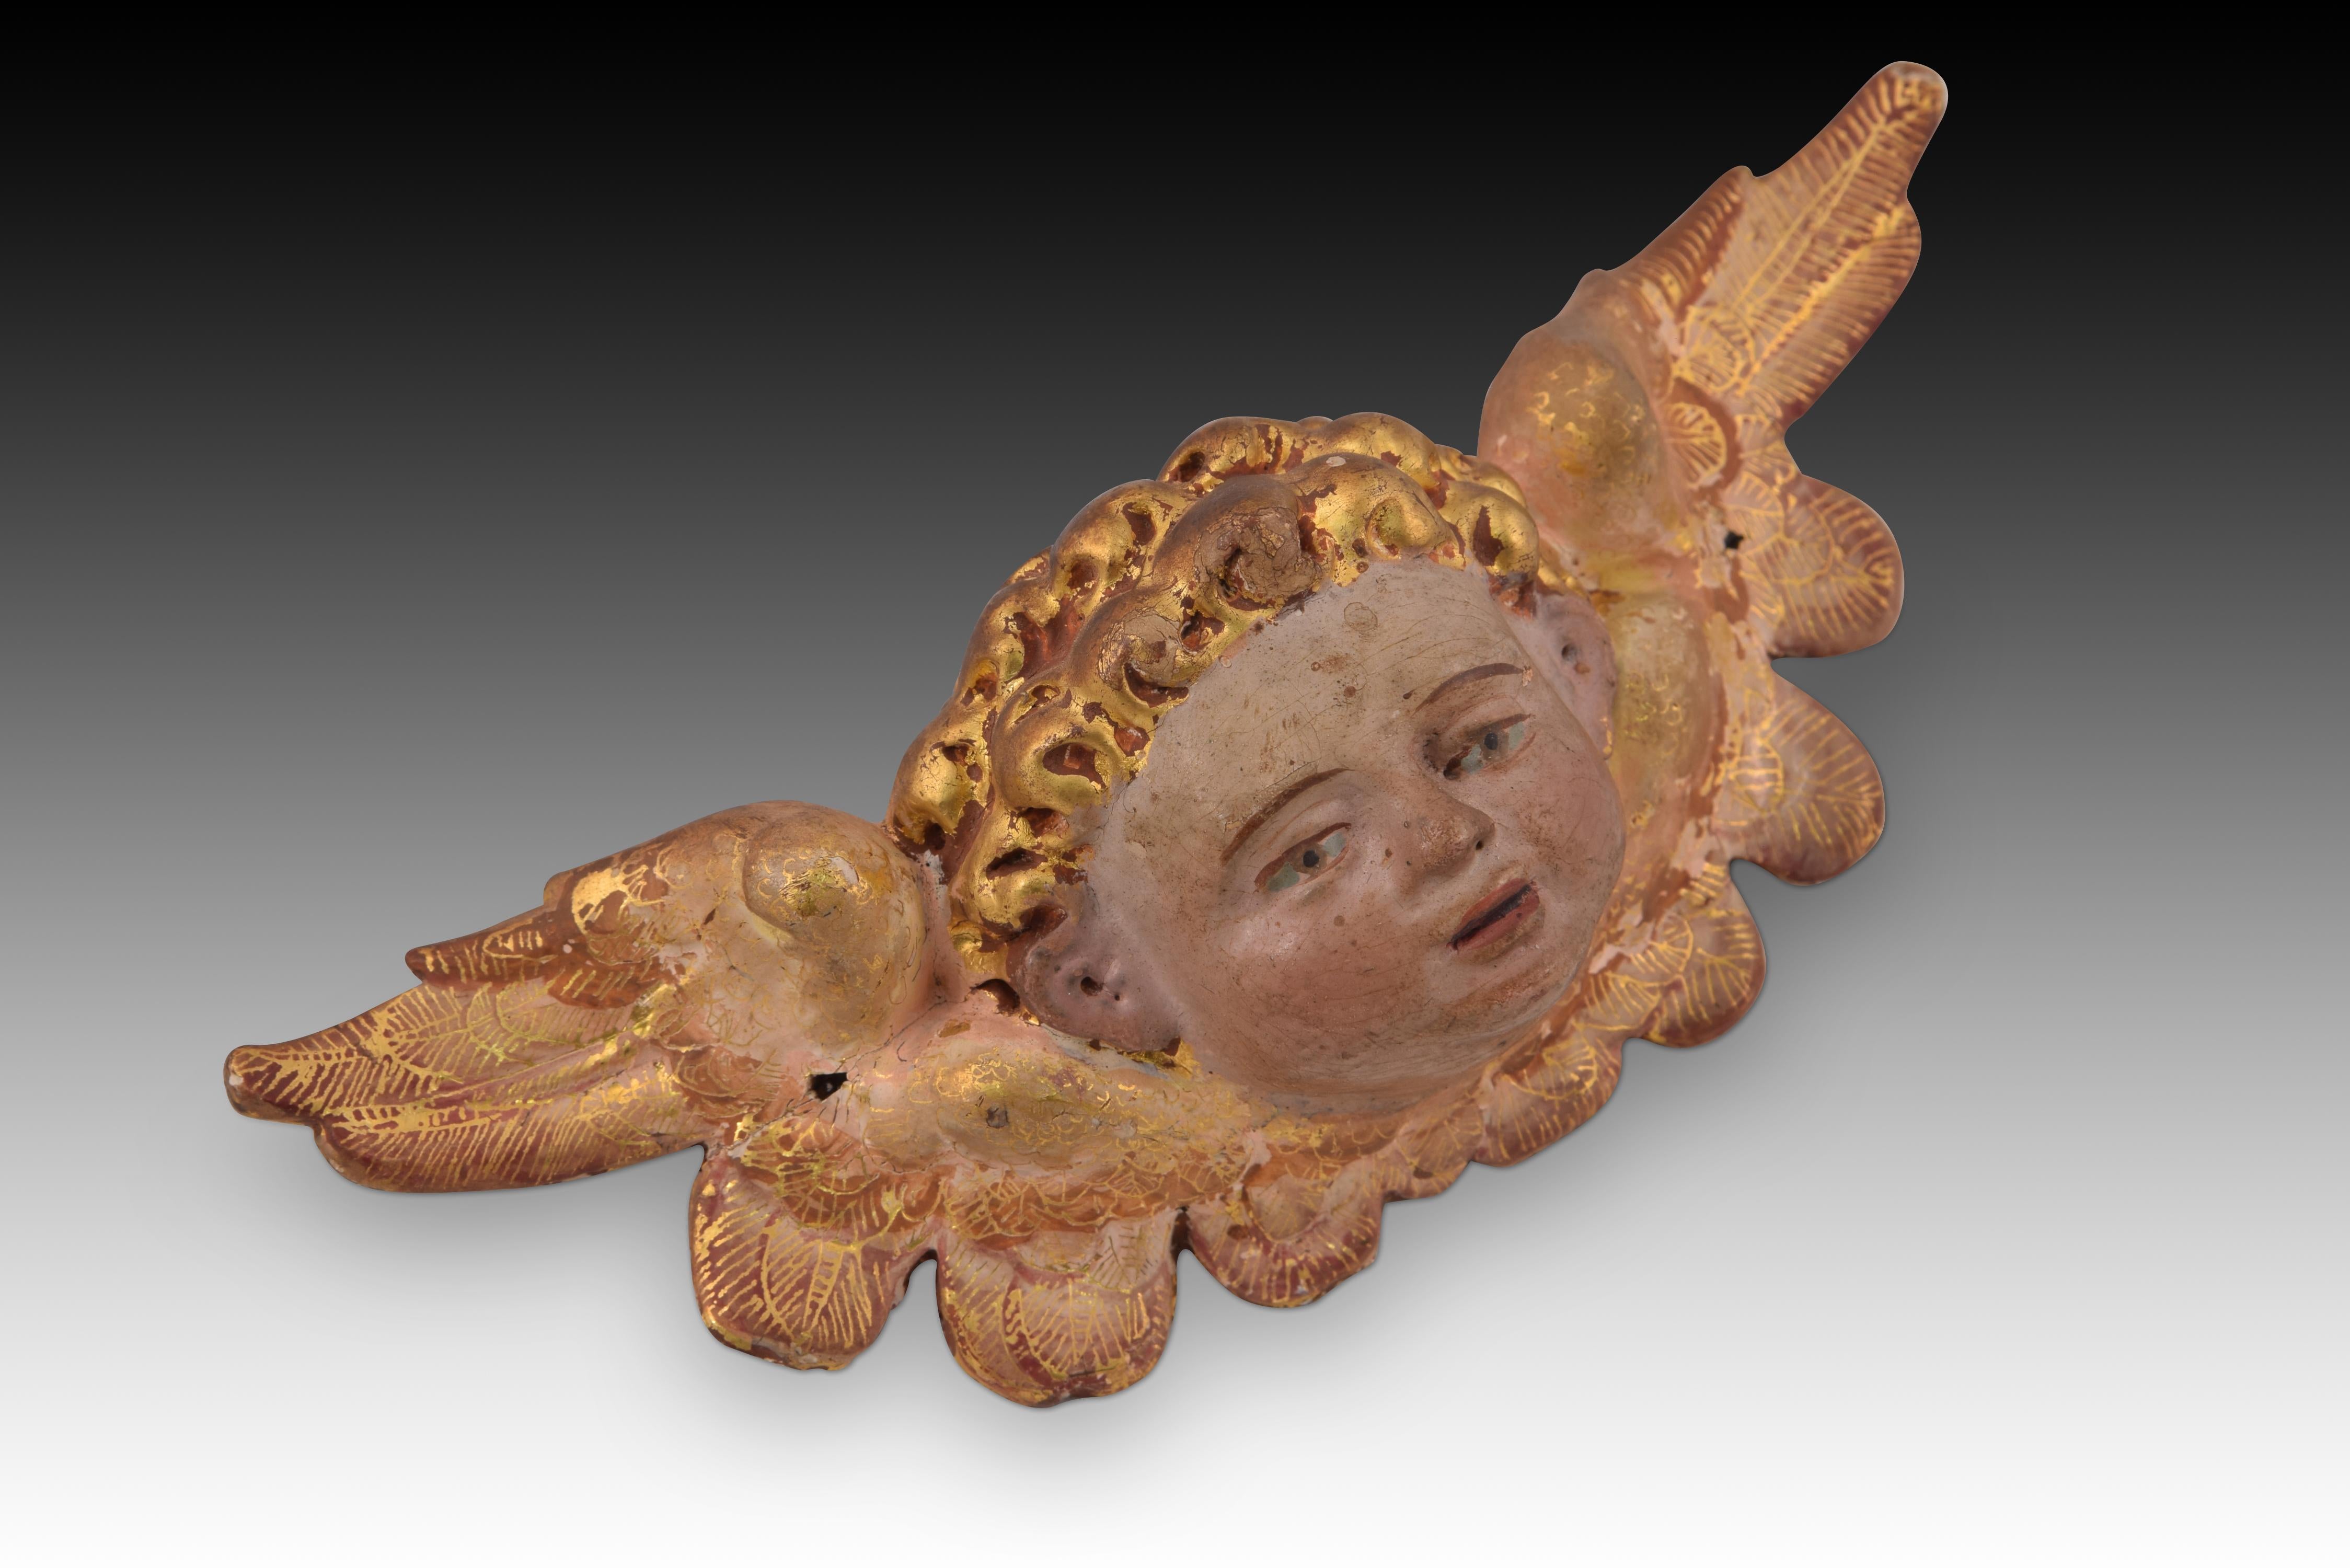 Winged angel head. Polychrome wood. Spanish school, 16th century. Carved and gilded wooden sculpture that shows a child's head with blonde, curly hair adorned with two wings. This type of sculpture of winged angels was very common throughout Europe